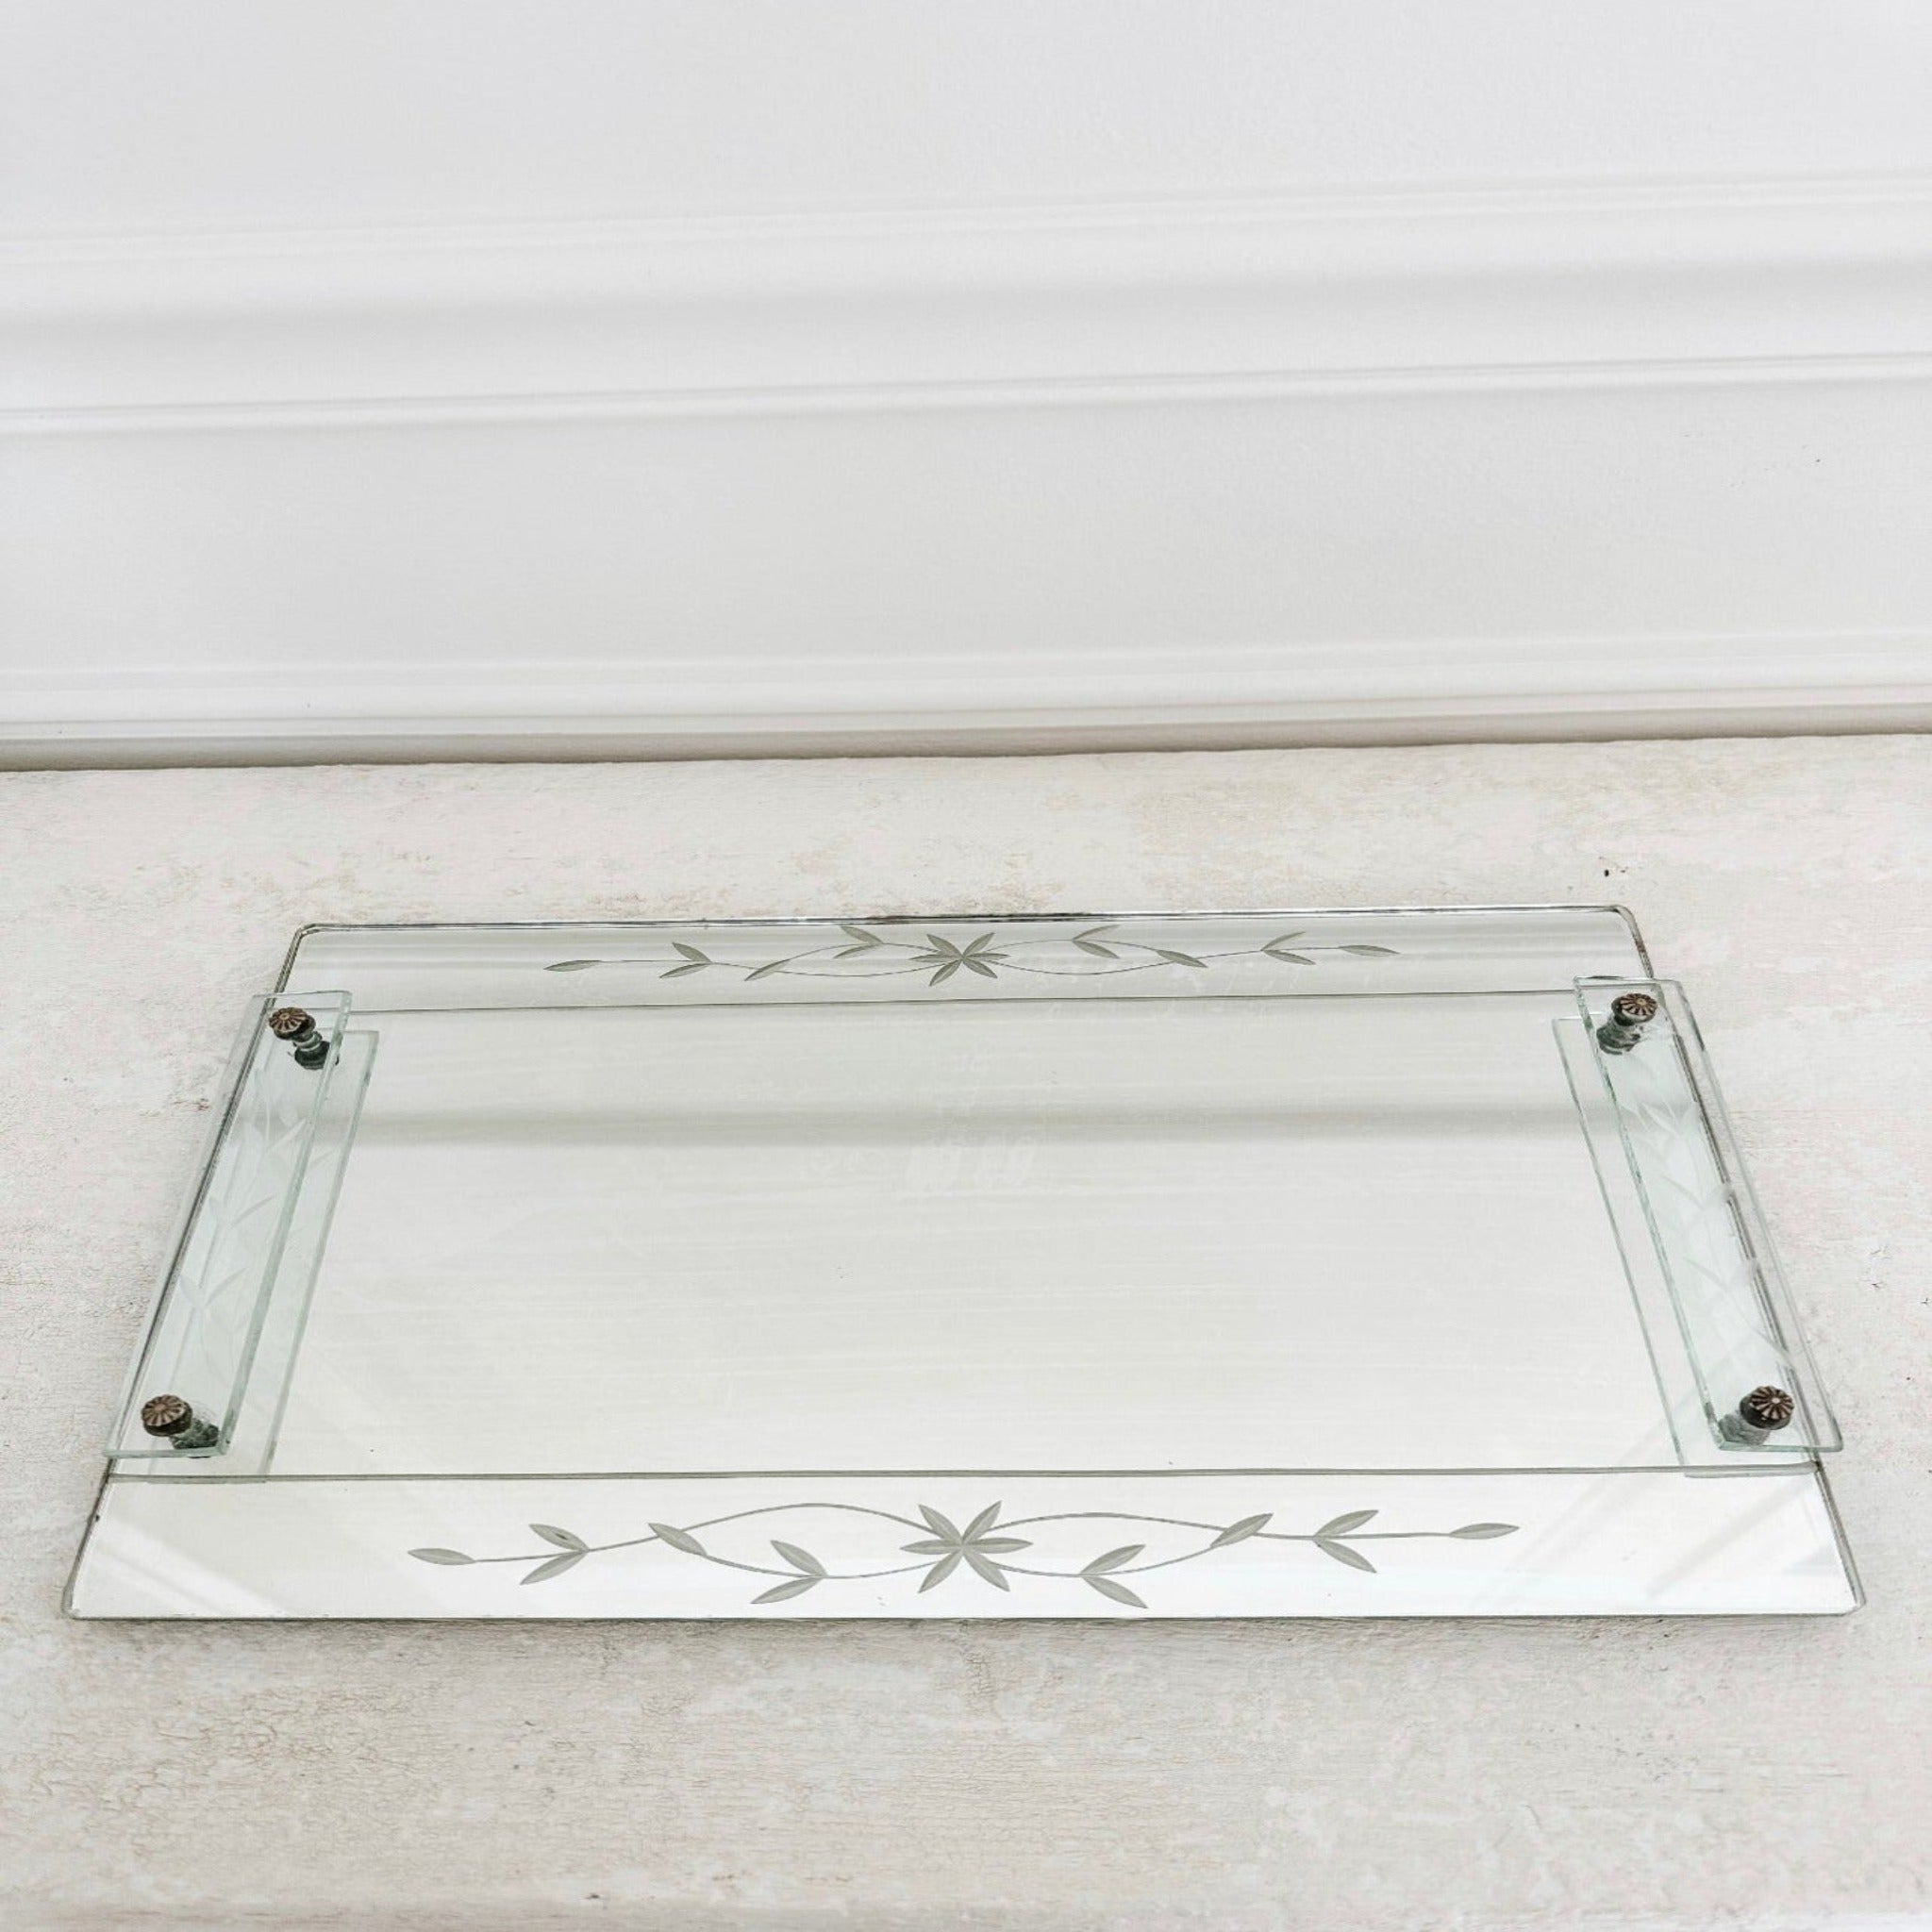 Vintage French Floral Etched Mirror Tray with Handles - Ivory Lane Home